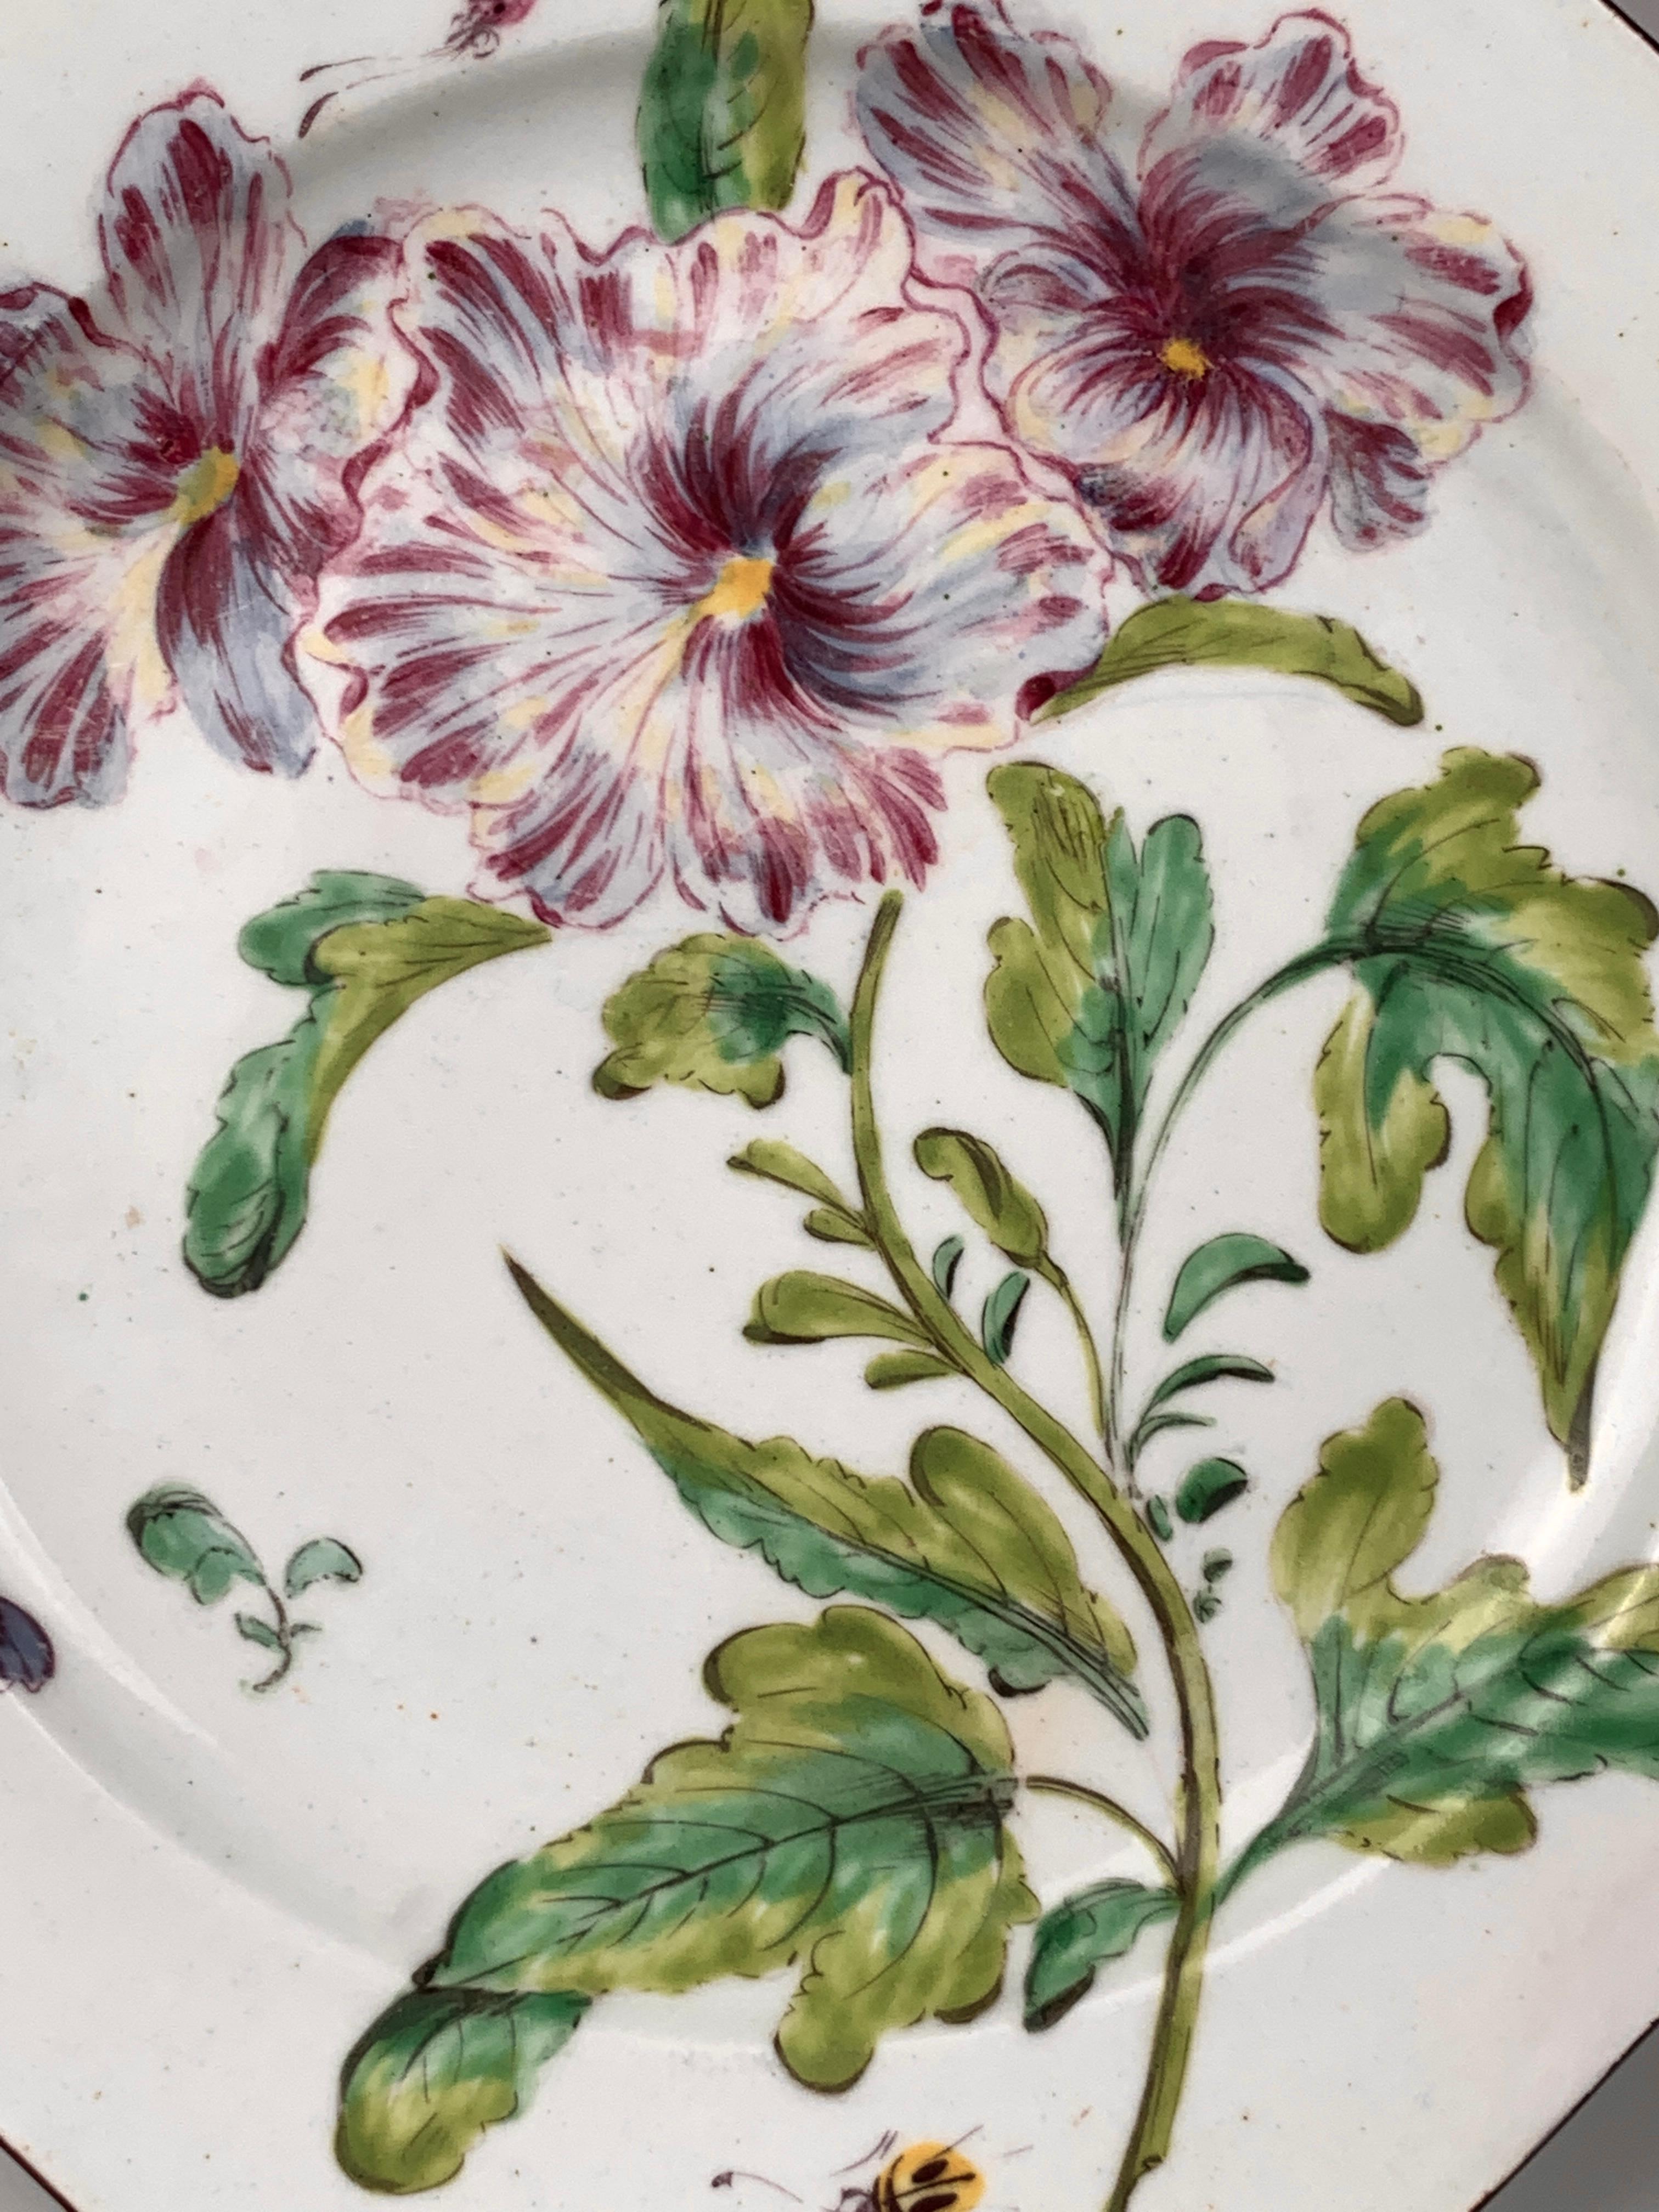 Why we love it: Look at the flower!
This rare Bow porcelain botanical plate was hand-painted in England circa 1760. The exuberant flower painting is still fresh and exciting today. The fully-painted center shows an exquisite flowering hibiscus.